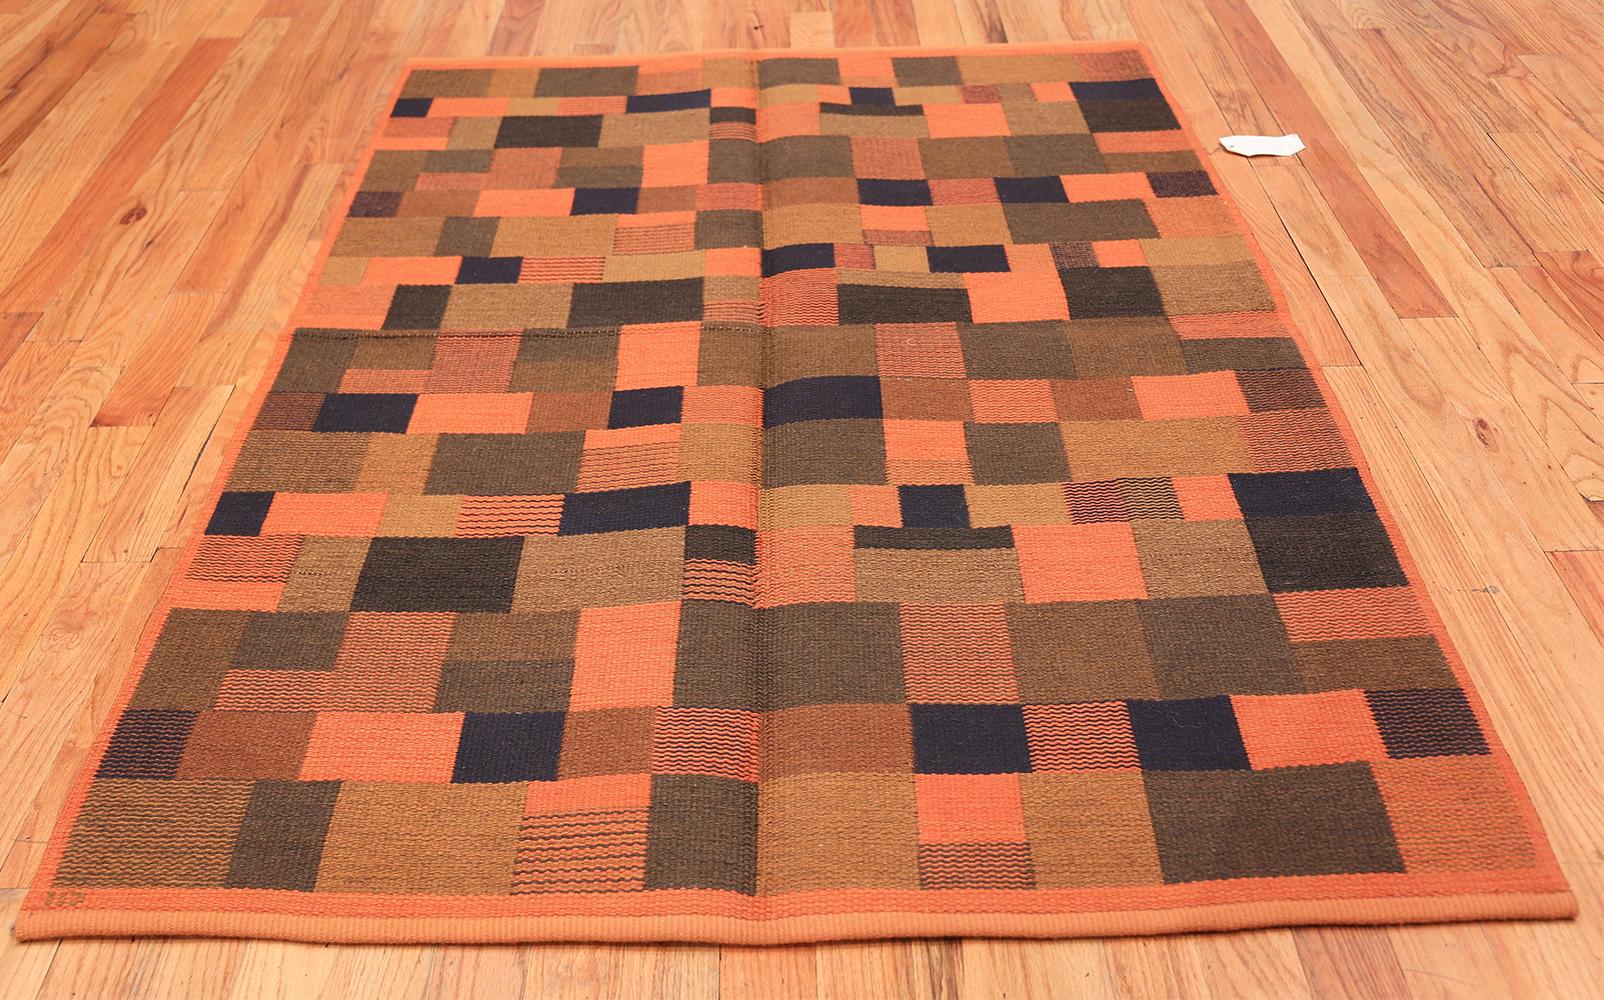 Vintage Scandinavian rug by Textile Artist Ingrid Dessau, Country Of Origin: Sweden, circa mid-20th century –Size: 4 ft 7 in x 6 ft 10 in (1.4 m x 2.08 m)

This expressive flat-woven vintage rug from Sweden by the iconic Ingrid Dessau represents